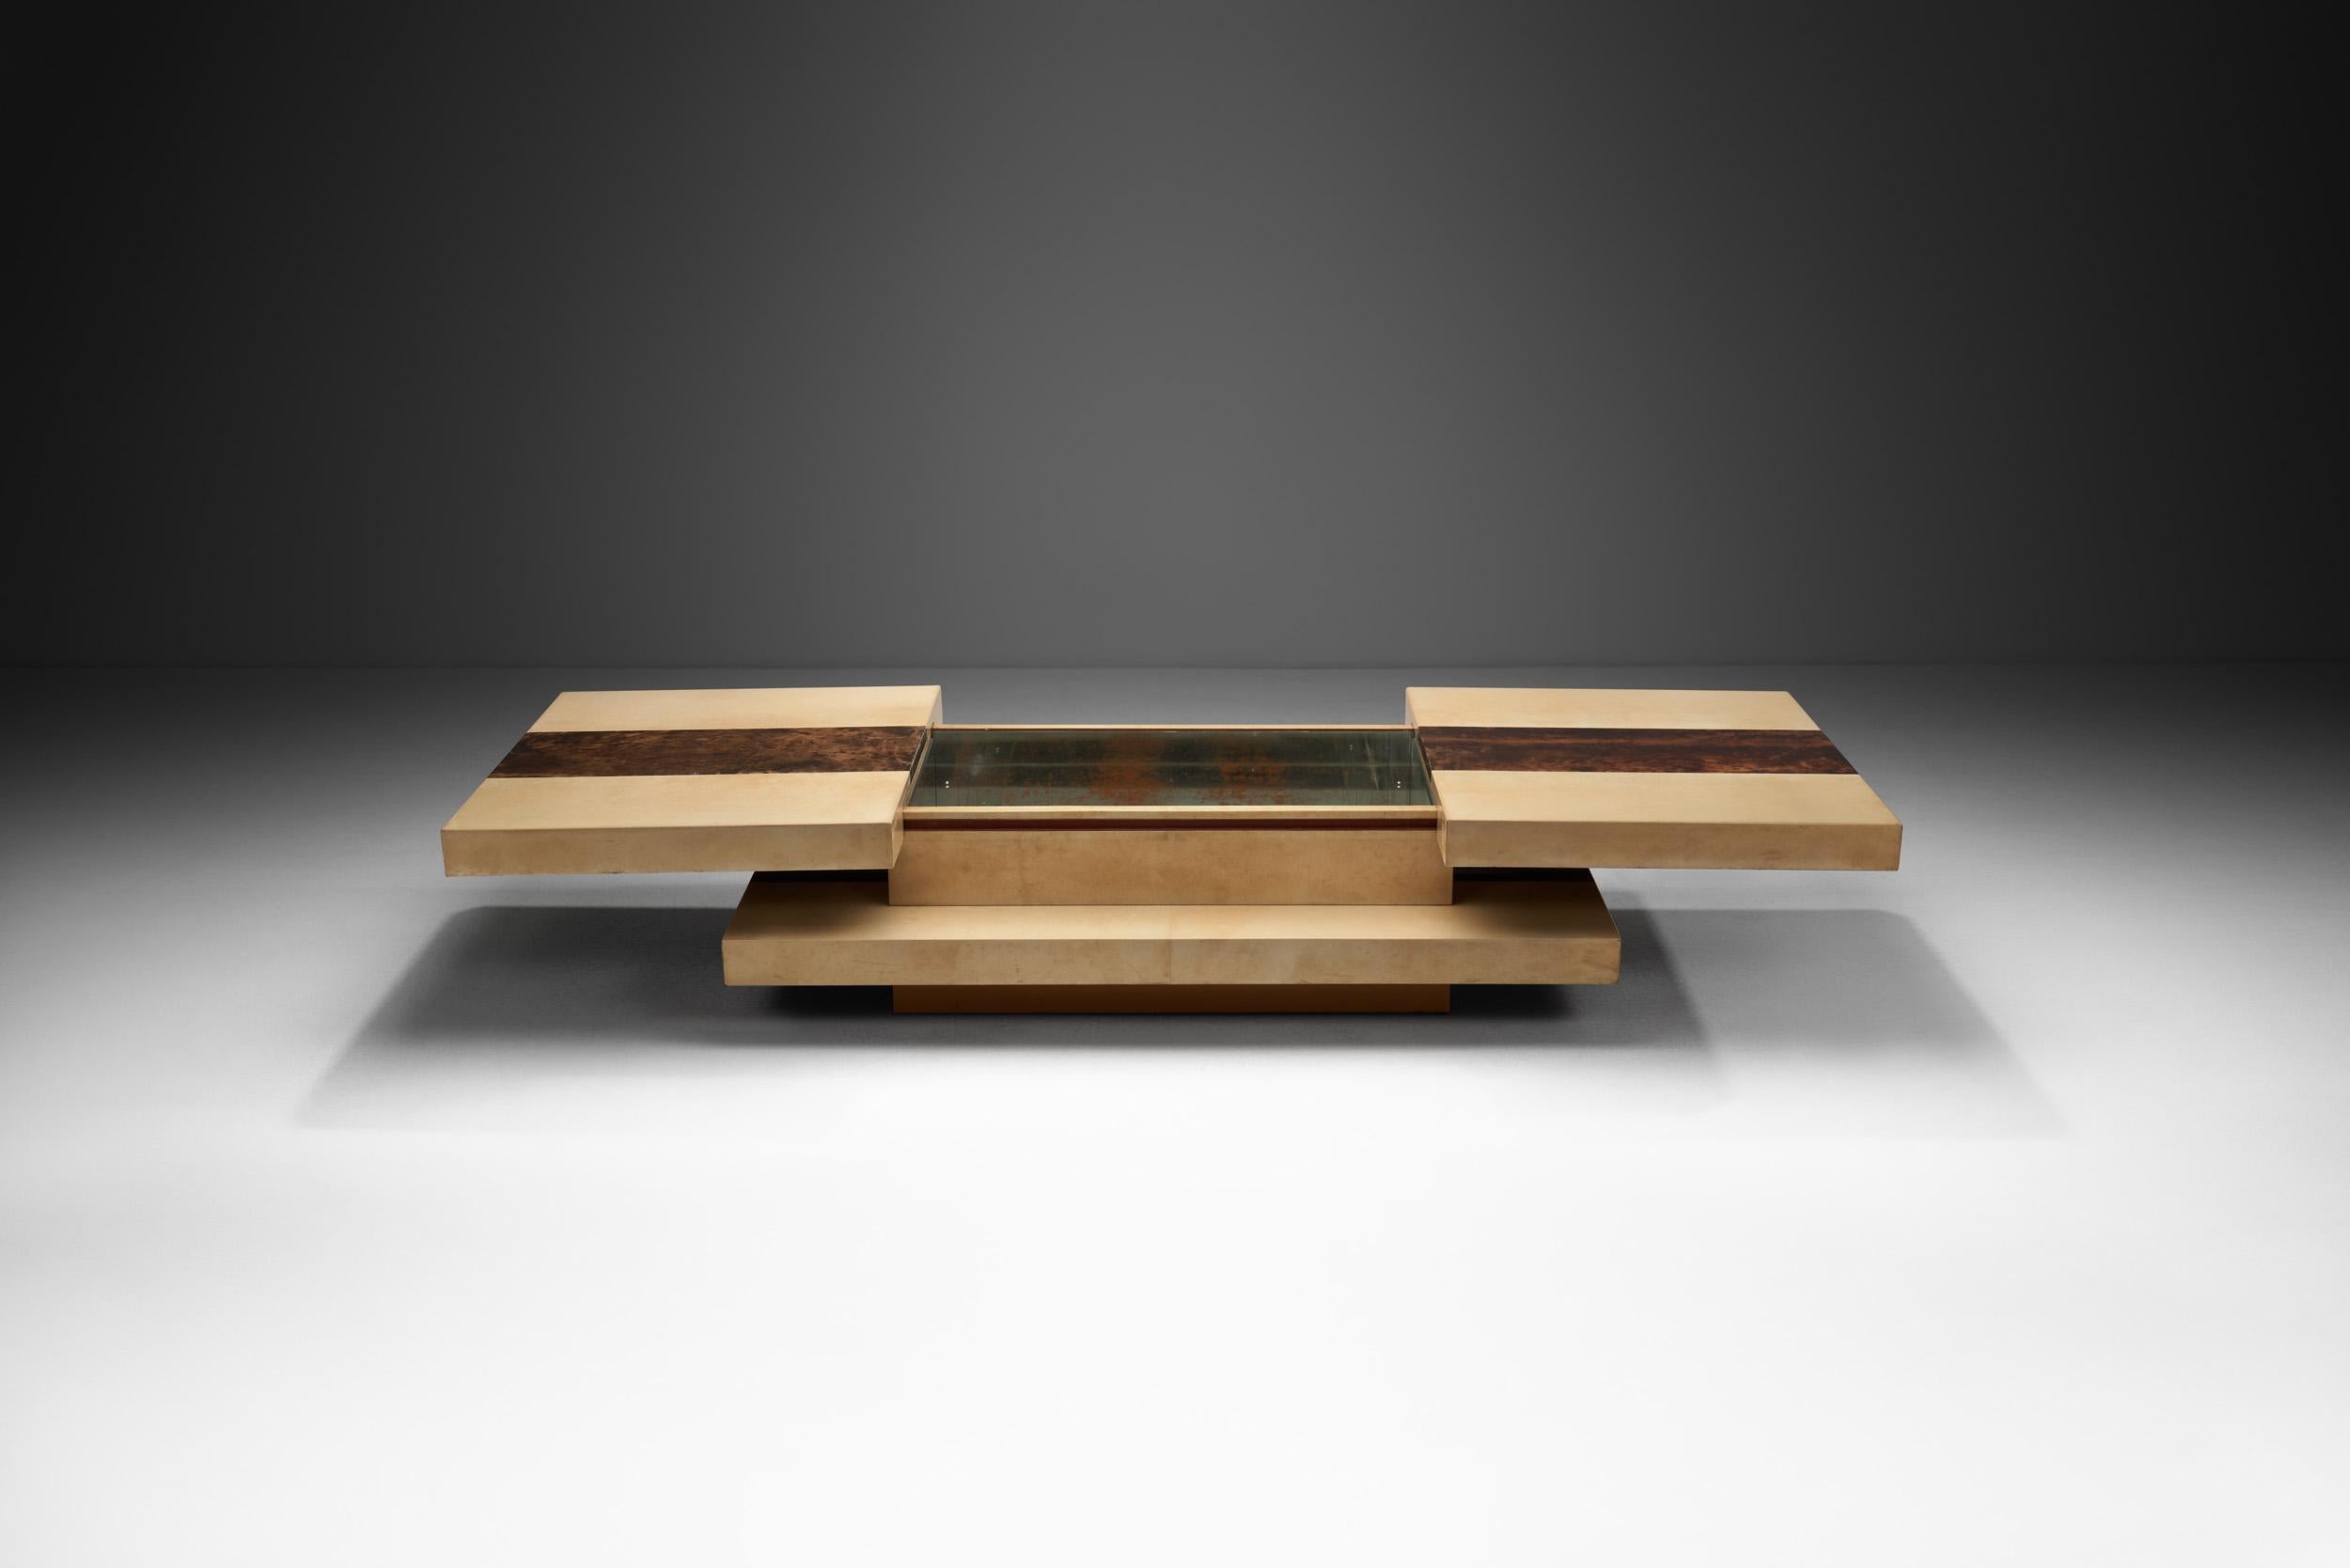 Italian Two-Tiered Sliding Coffee Table with Hidden Bar by Aldo Tura, Italy 1970s For Sale